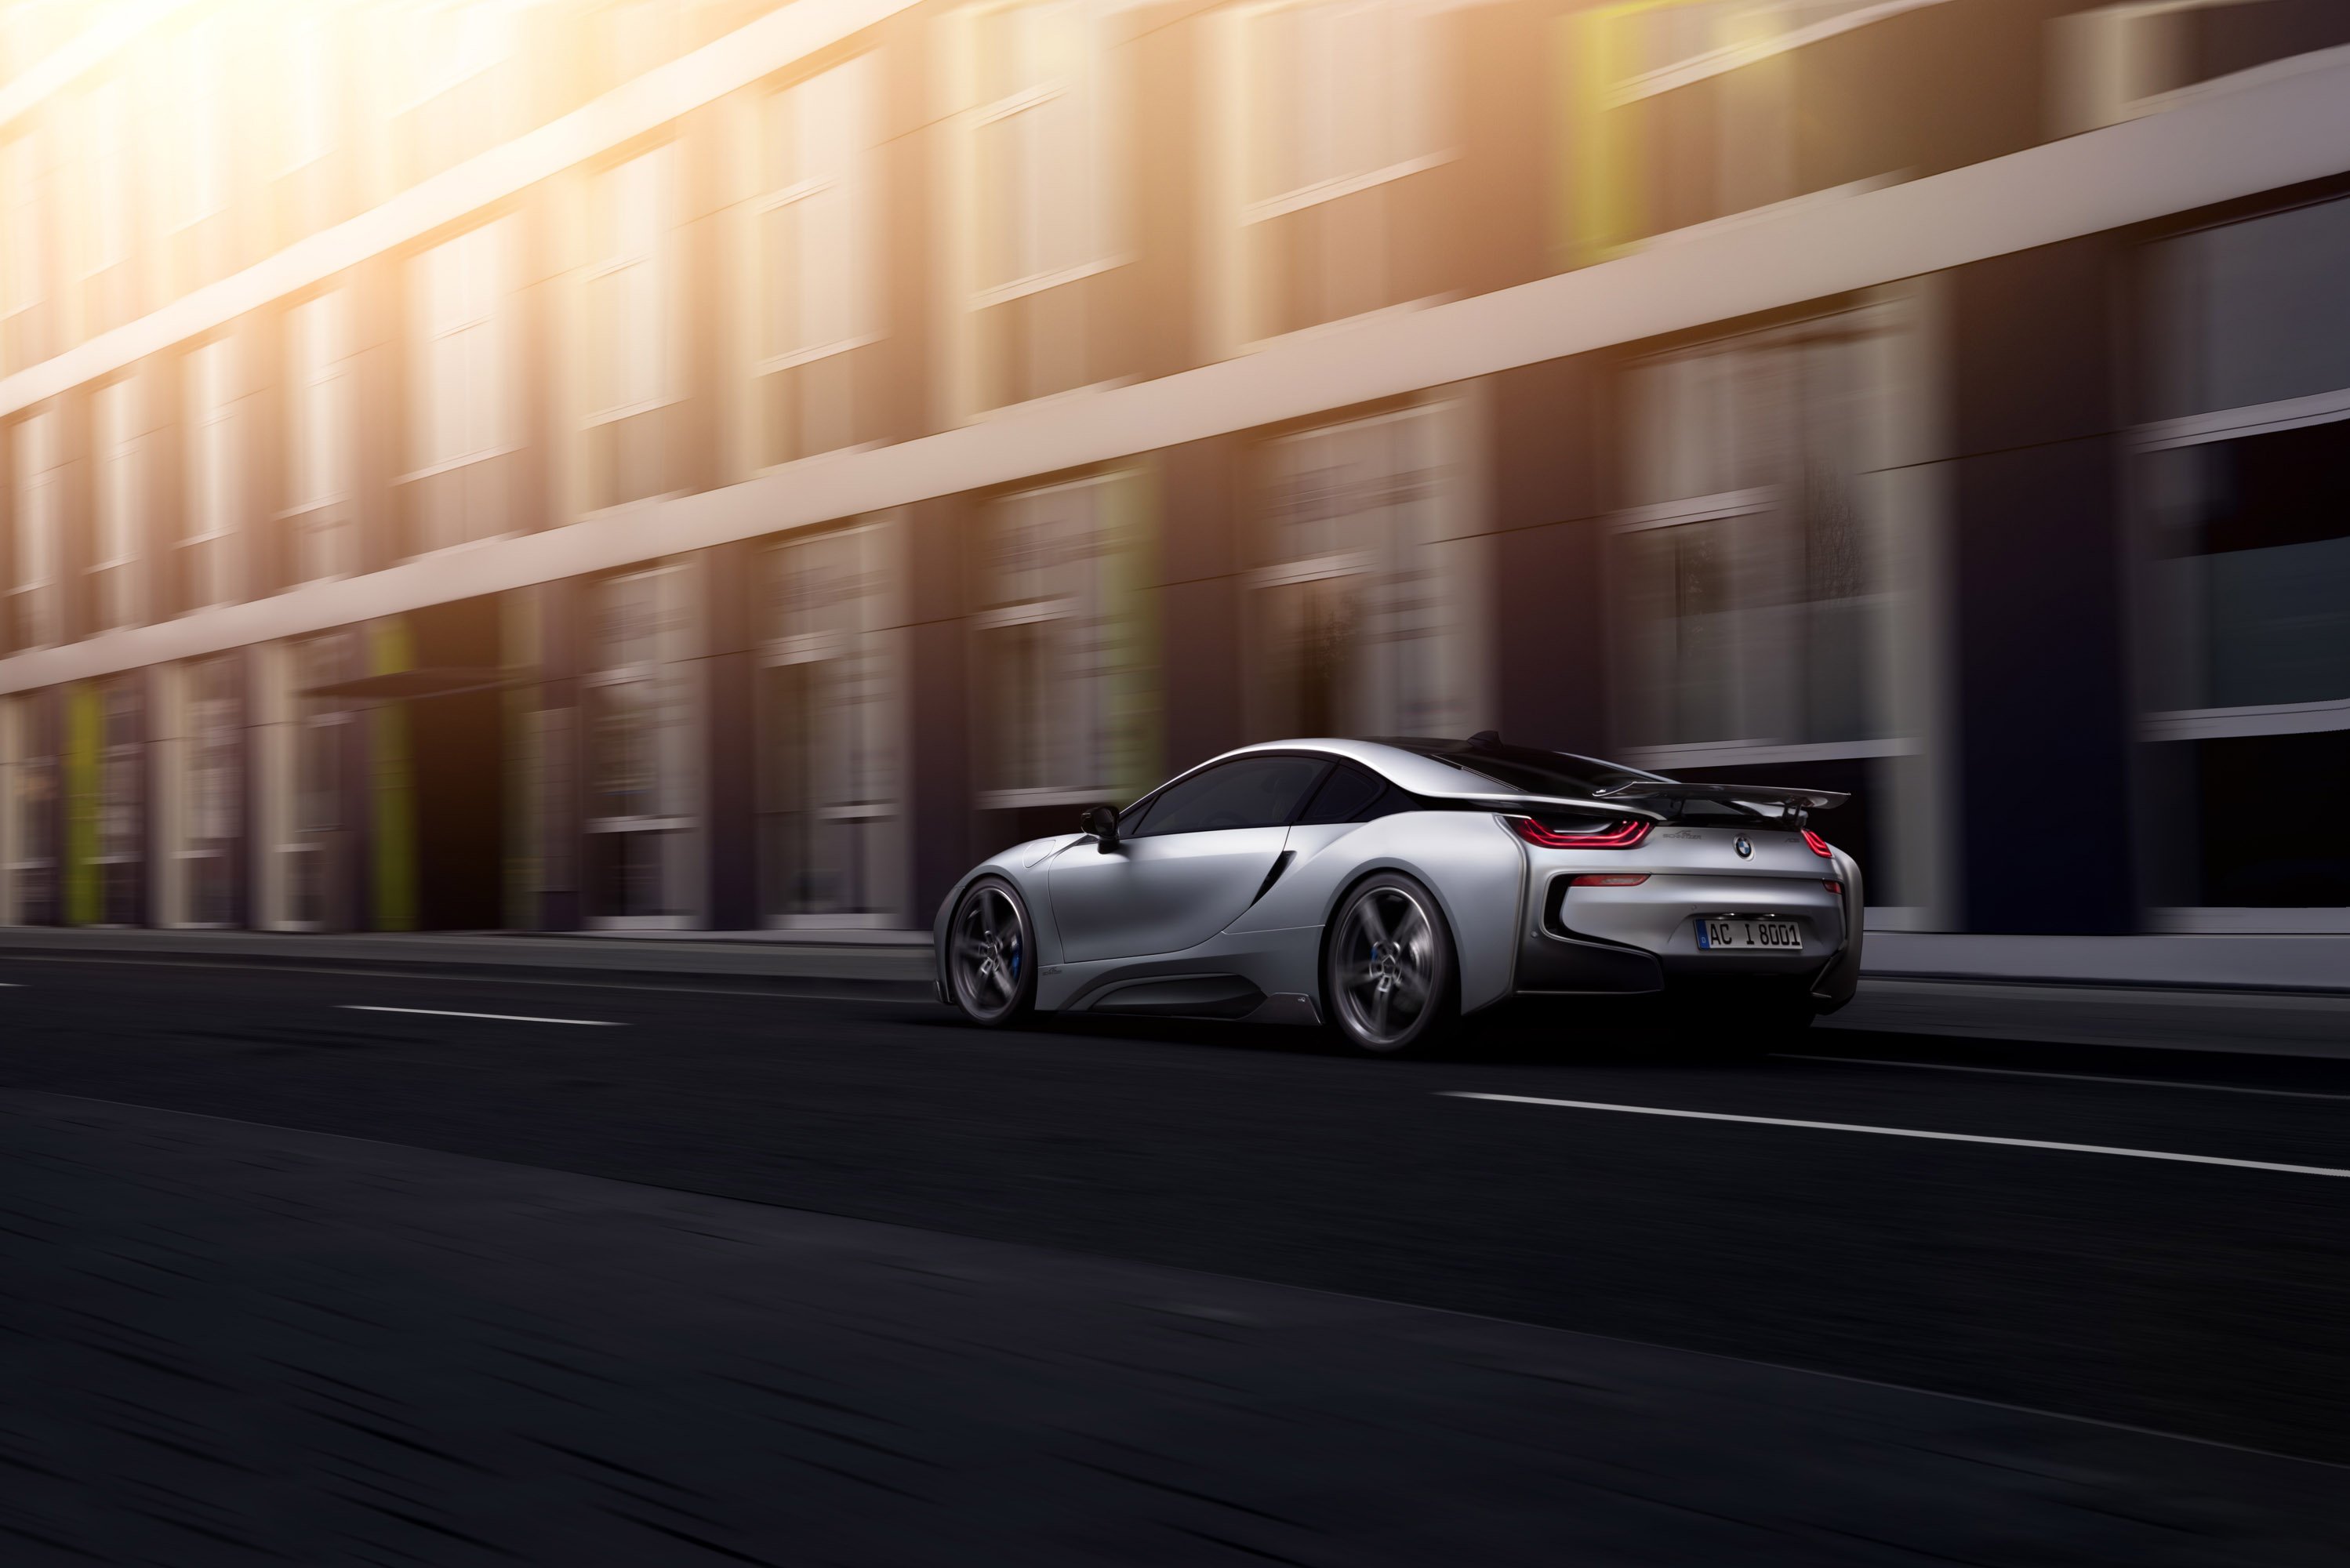 2015, Ac, Schnitzer, Bmw i8, Coupe, Cars, Electric, Modified, Tuning Wallpaper